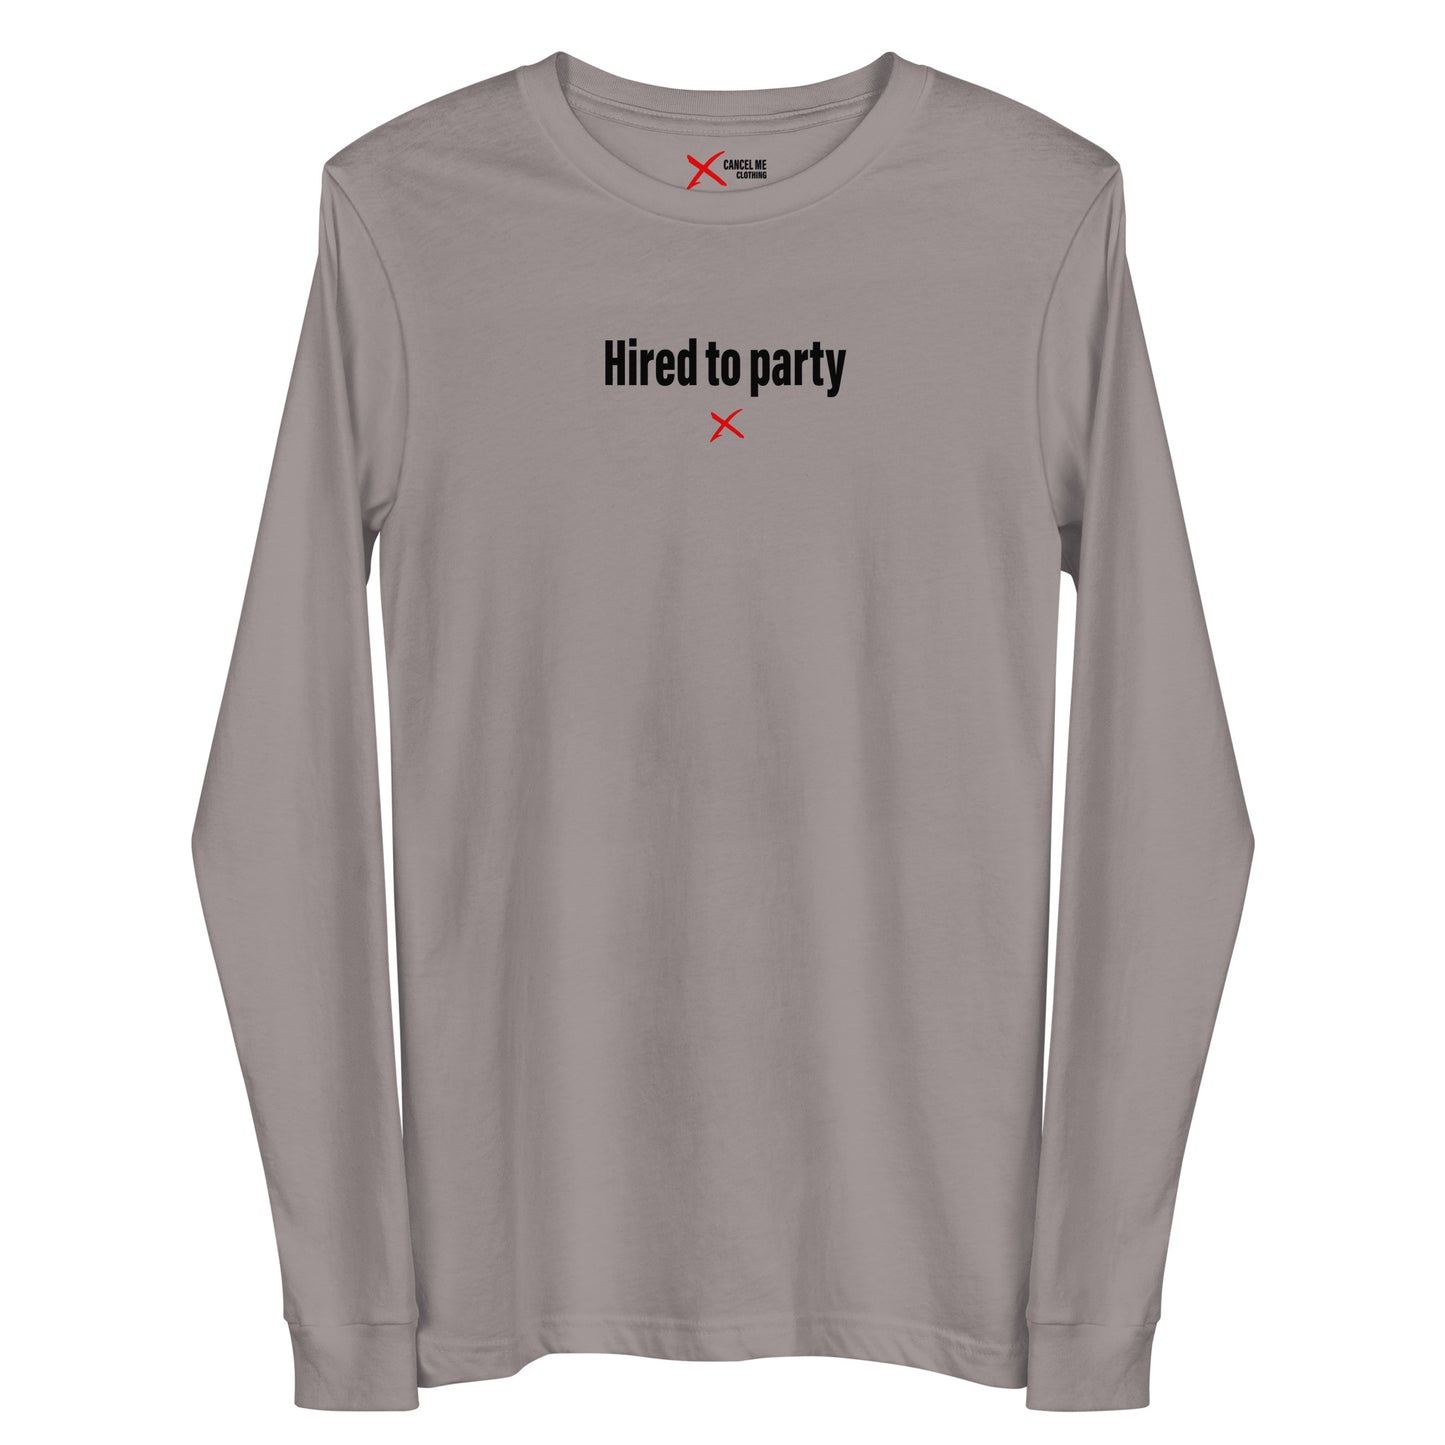 Hired to party - Longsleeve